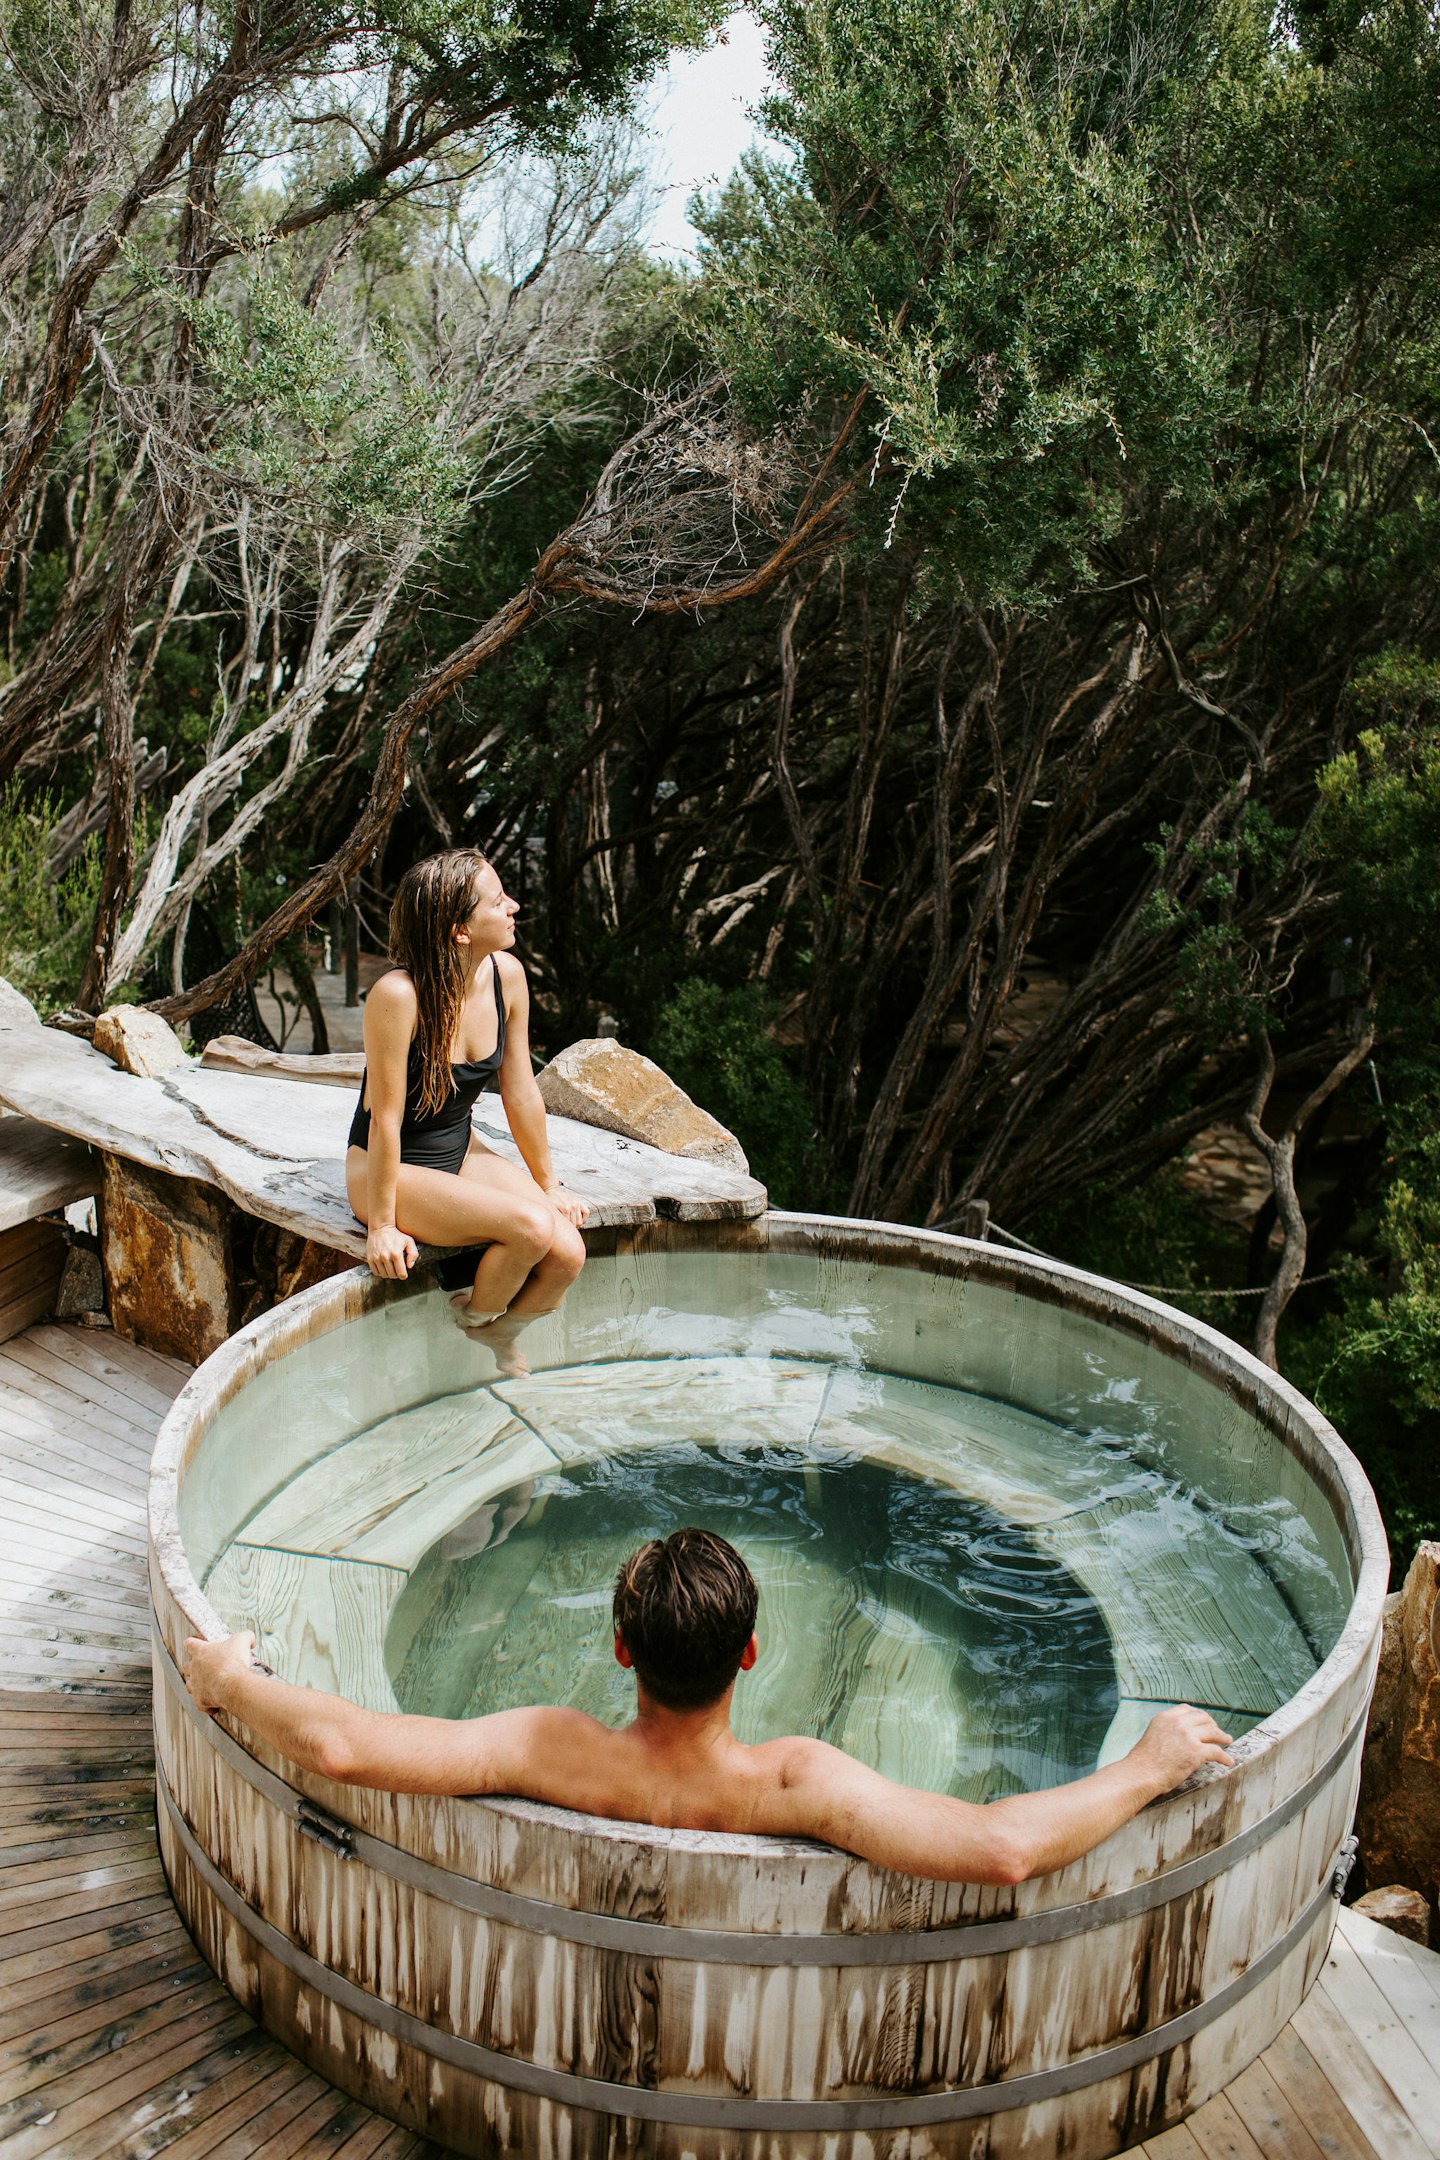 man sitting in barrel pool and woman sitting on edge looking out at trees